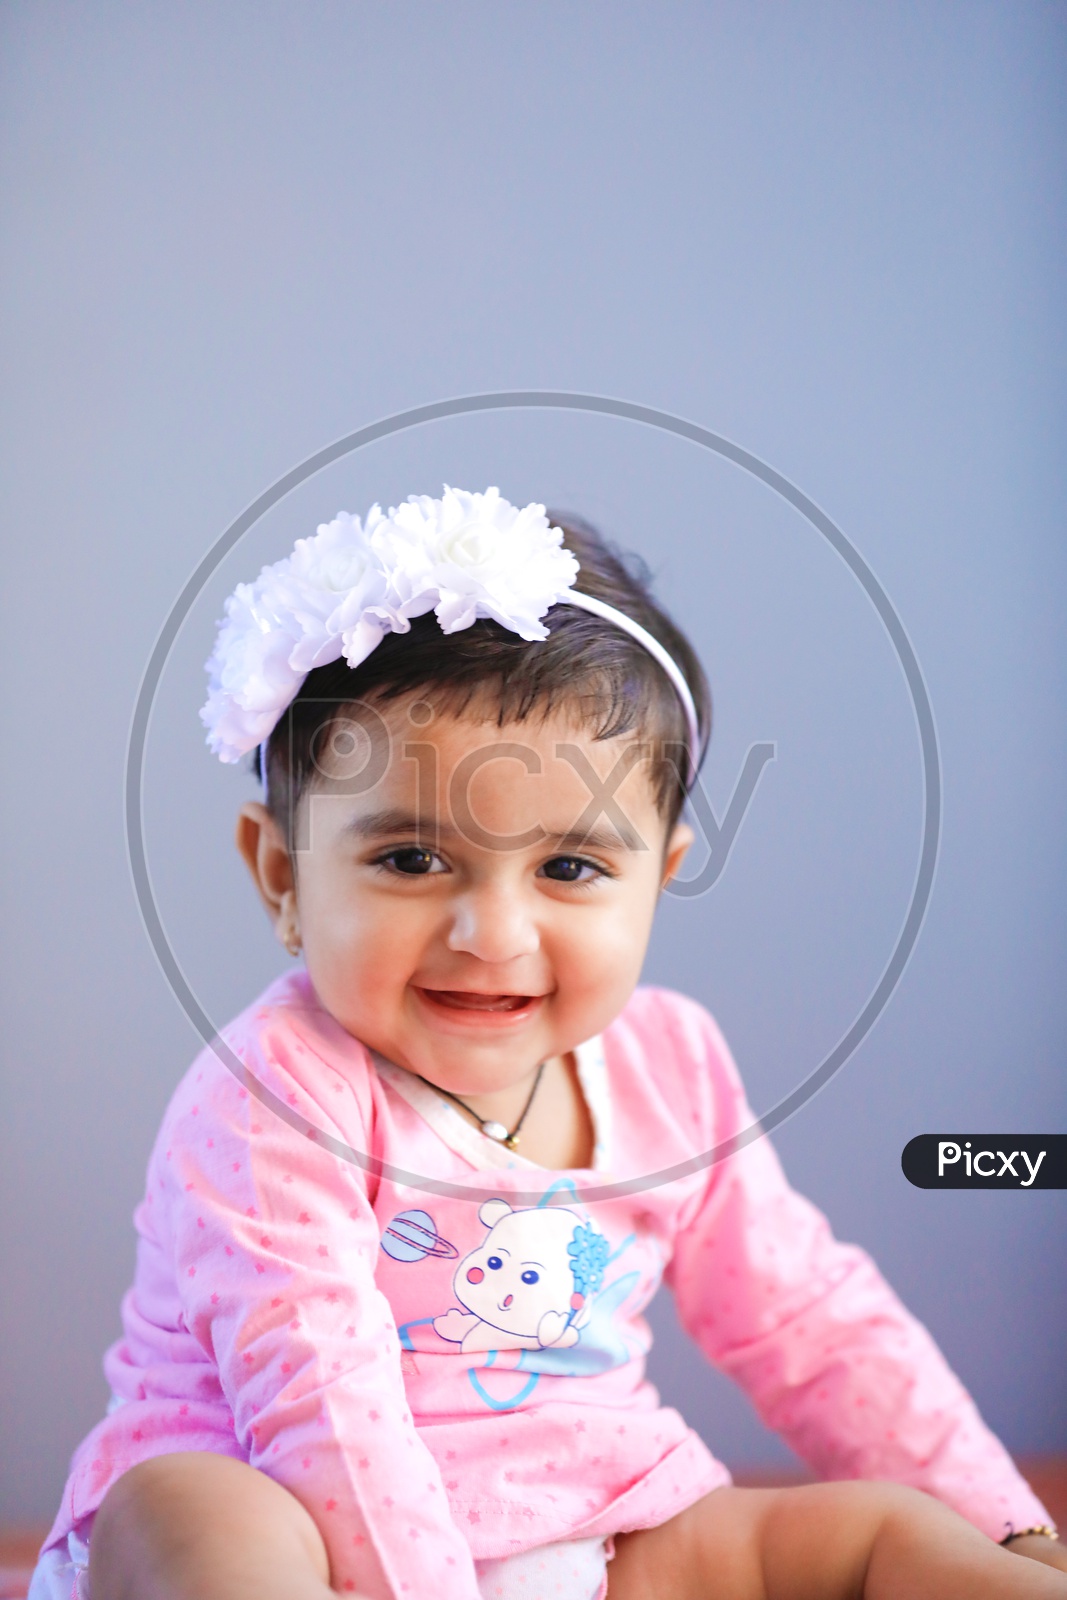 Cute Indian Baby Girl With Smiling Face On an Isolated White Background